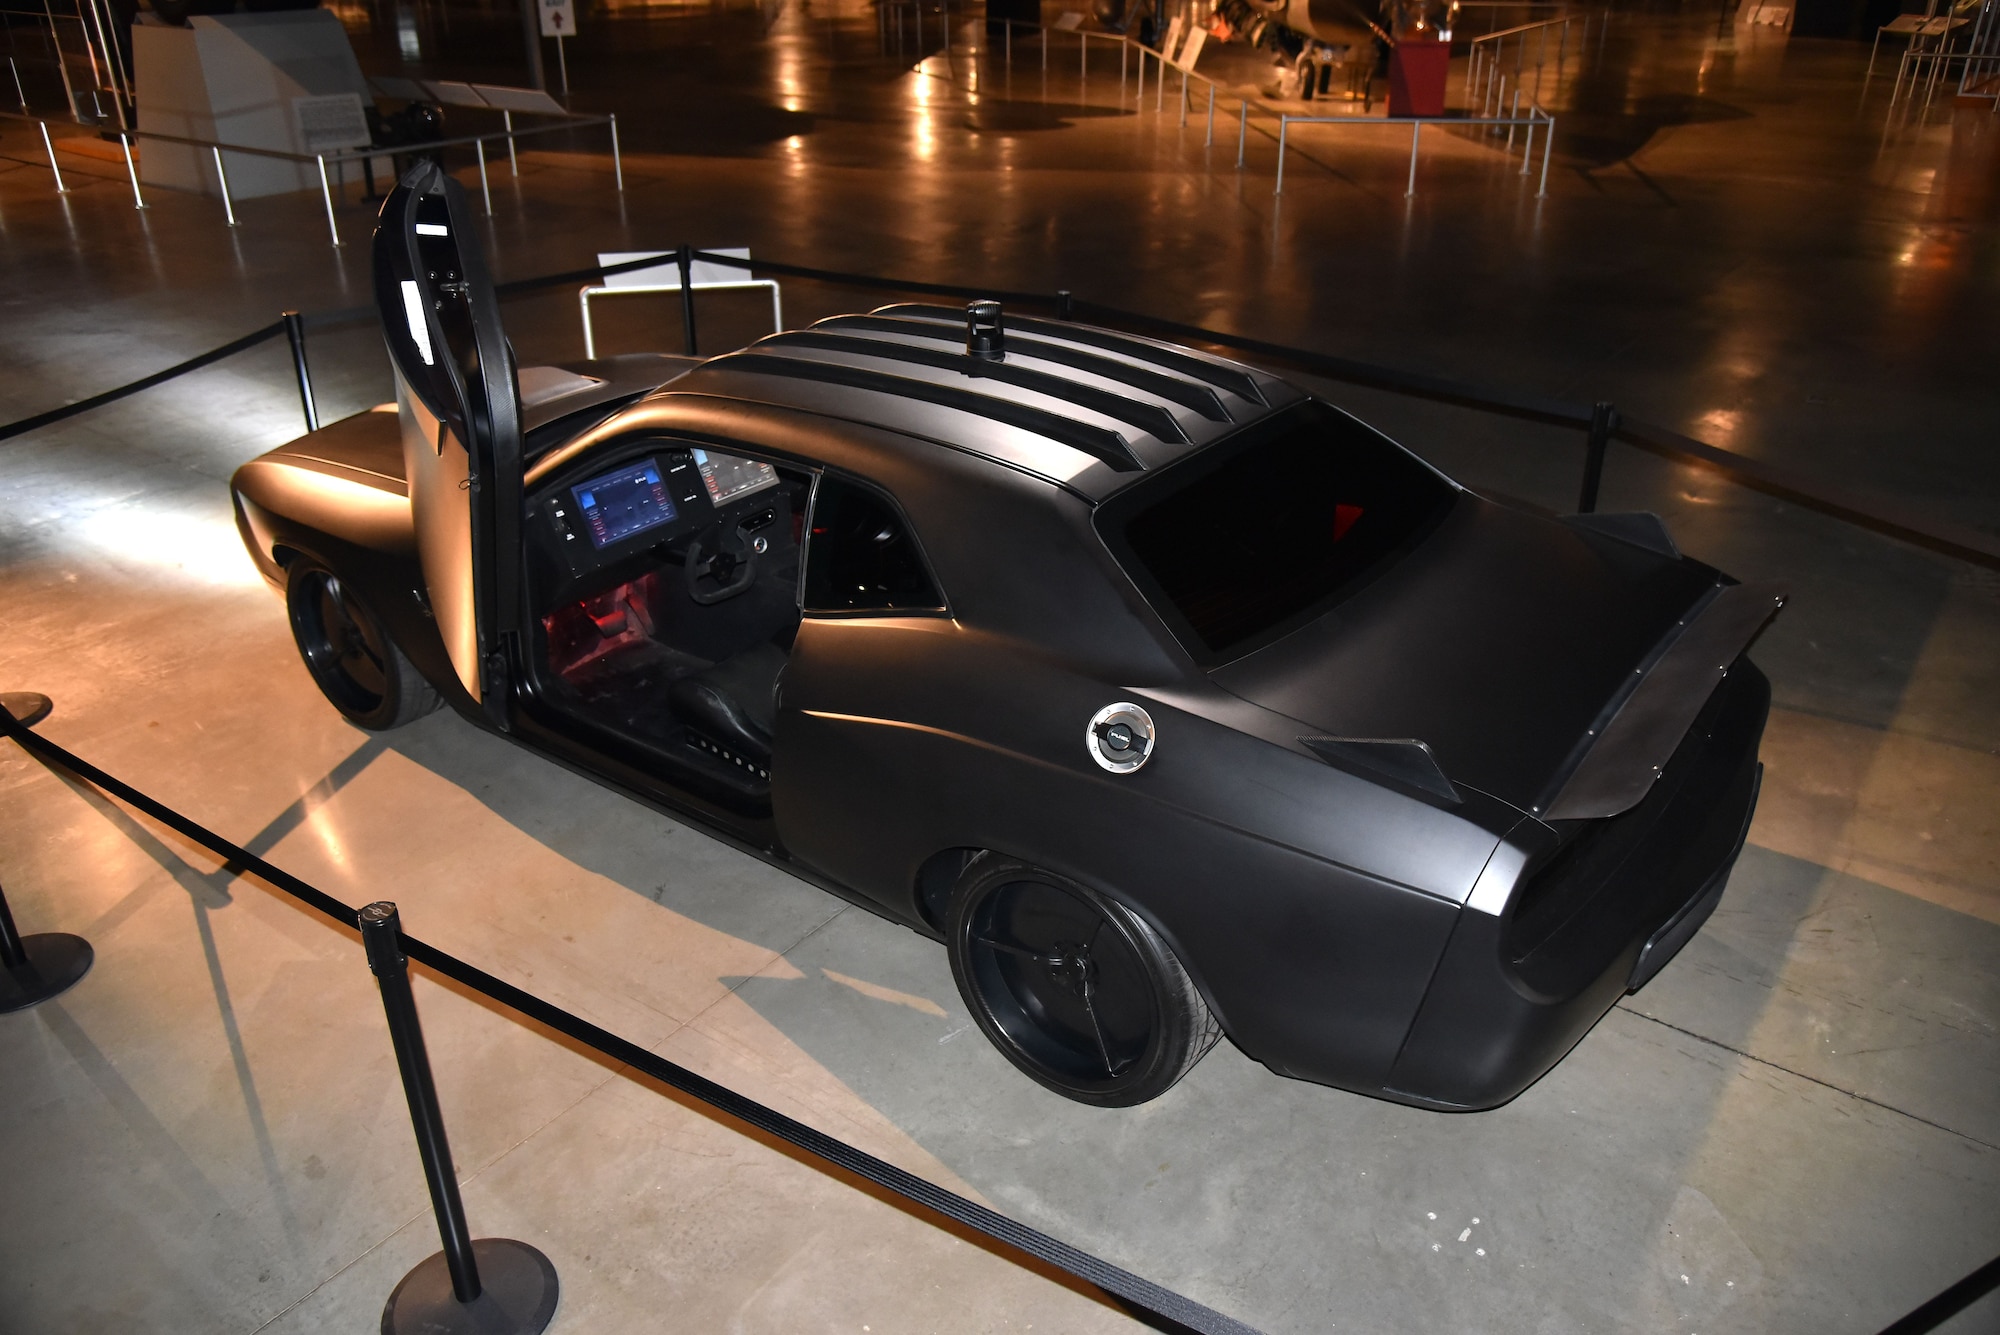 DAYTON, Ohio -- The Air Force’s customized Vapor Special Ops Supercar on display in the museum's third building. (U.S. Air Force photo)